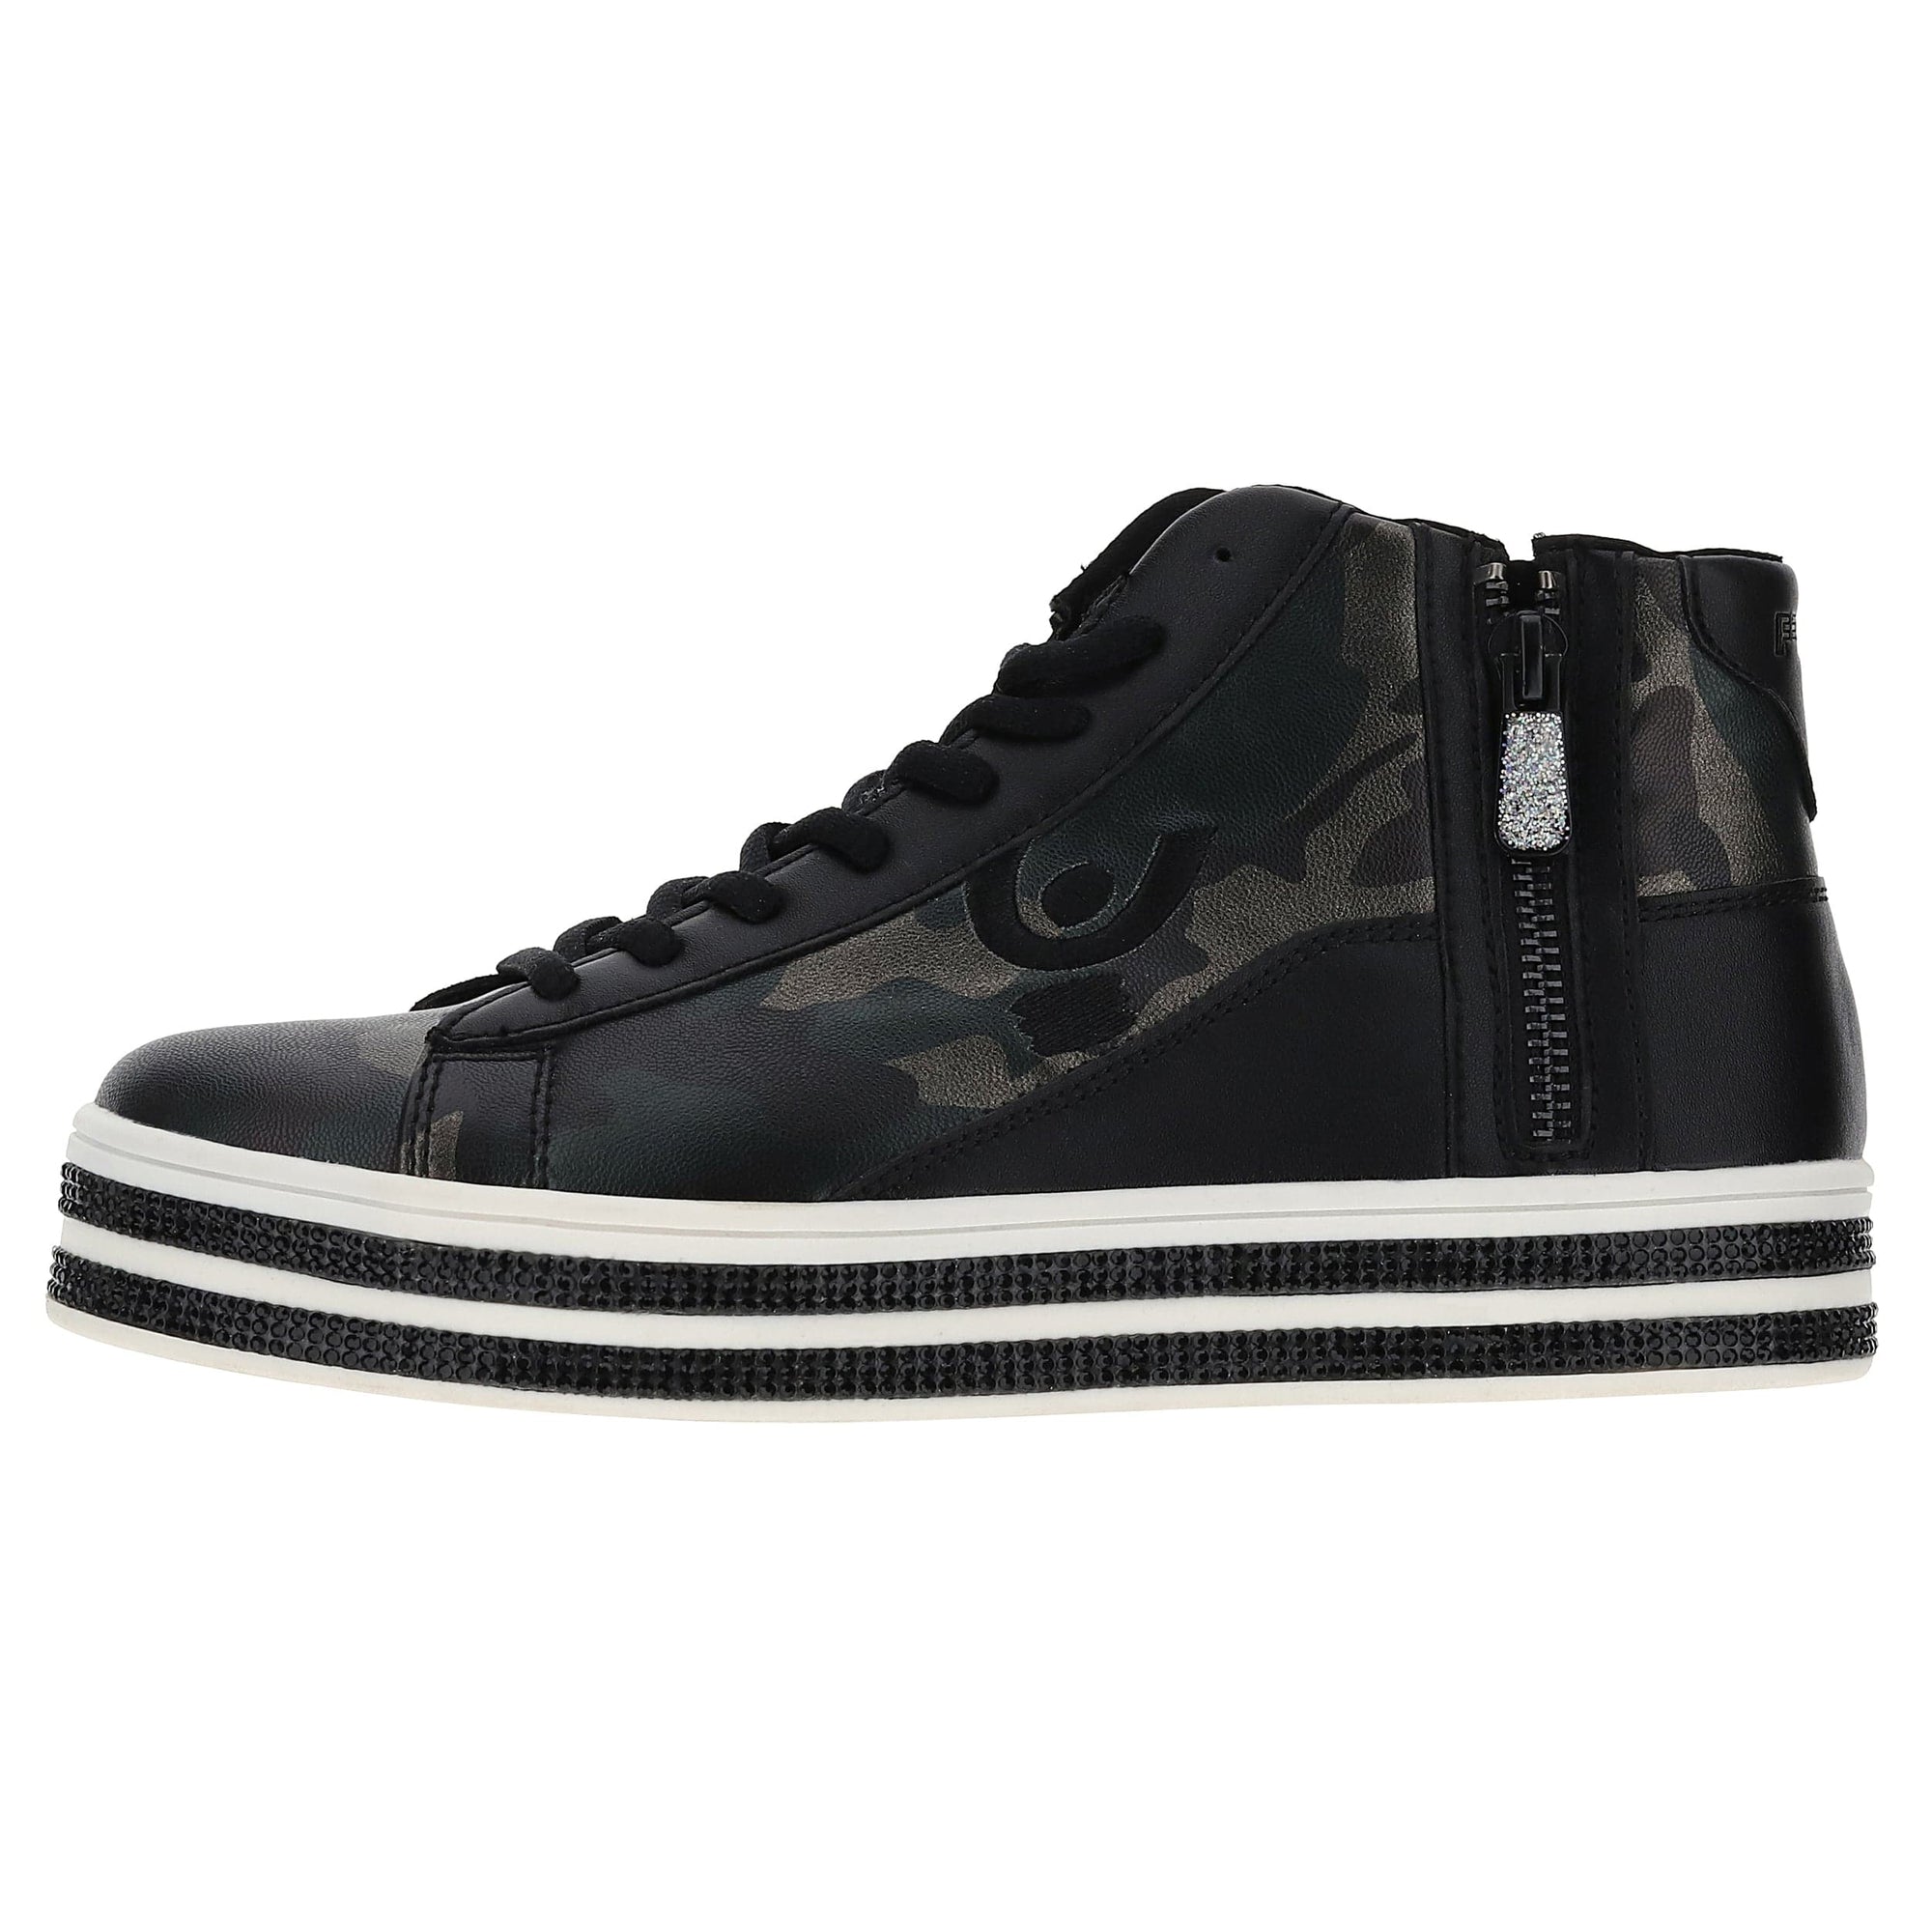 Women's Faux Leather High Top Shoes - Black 2